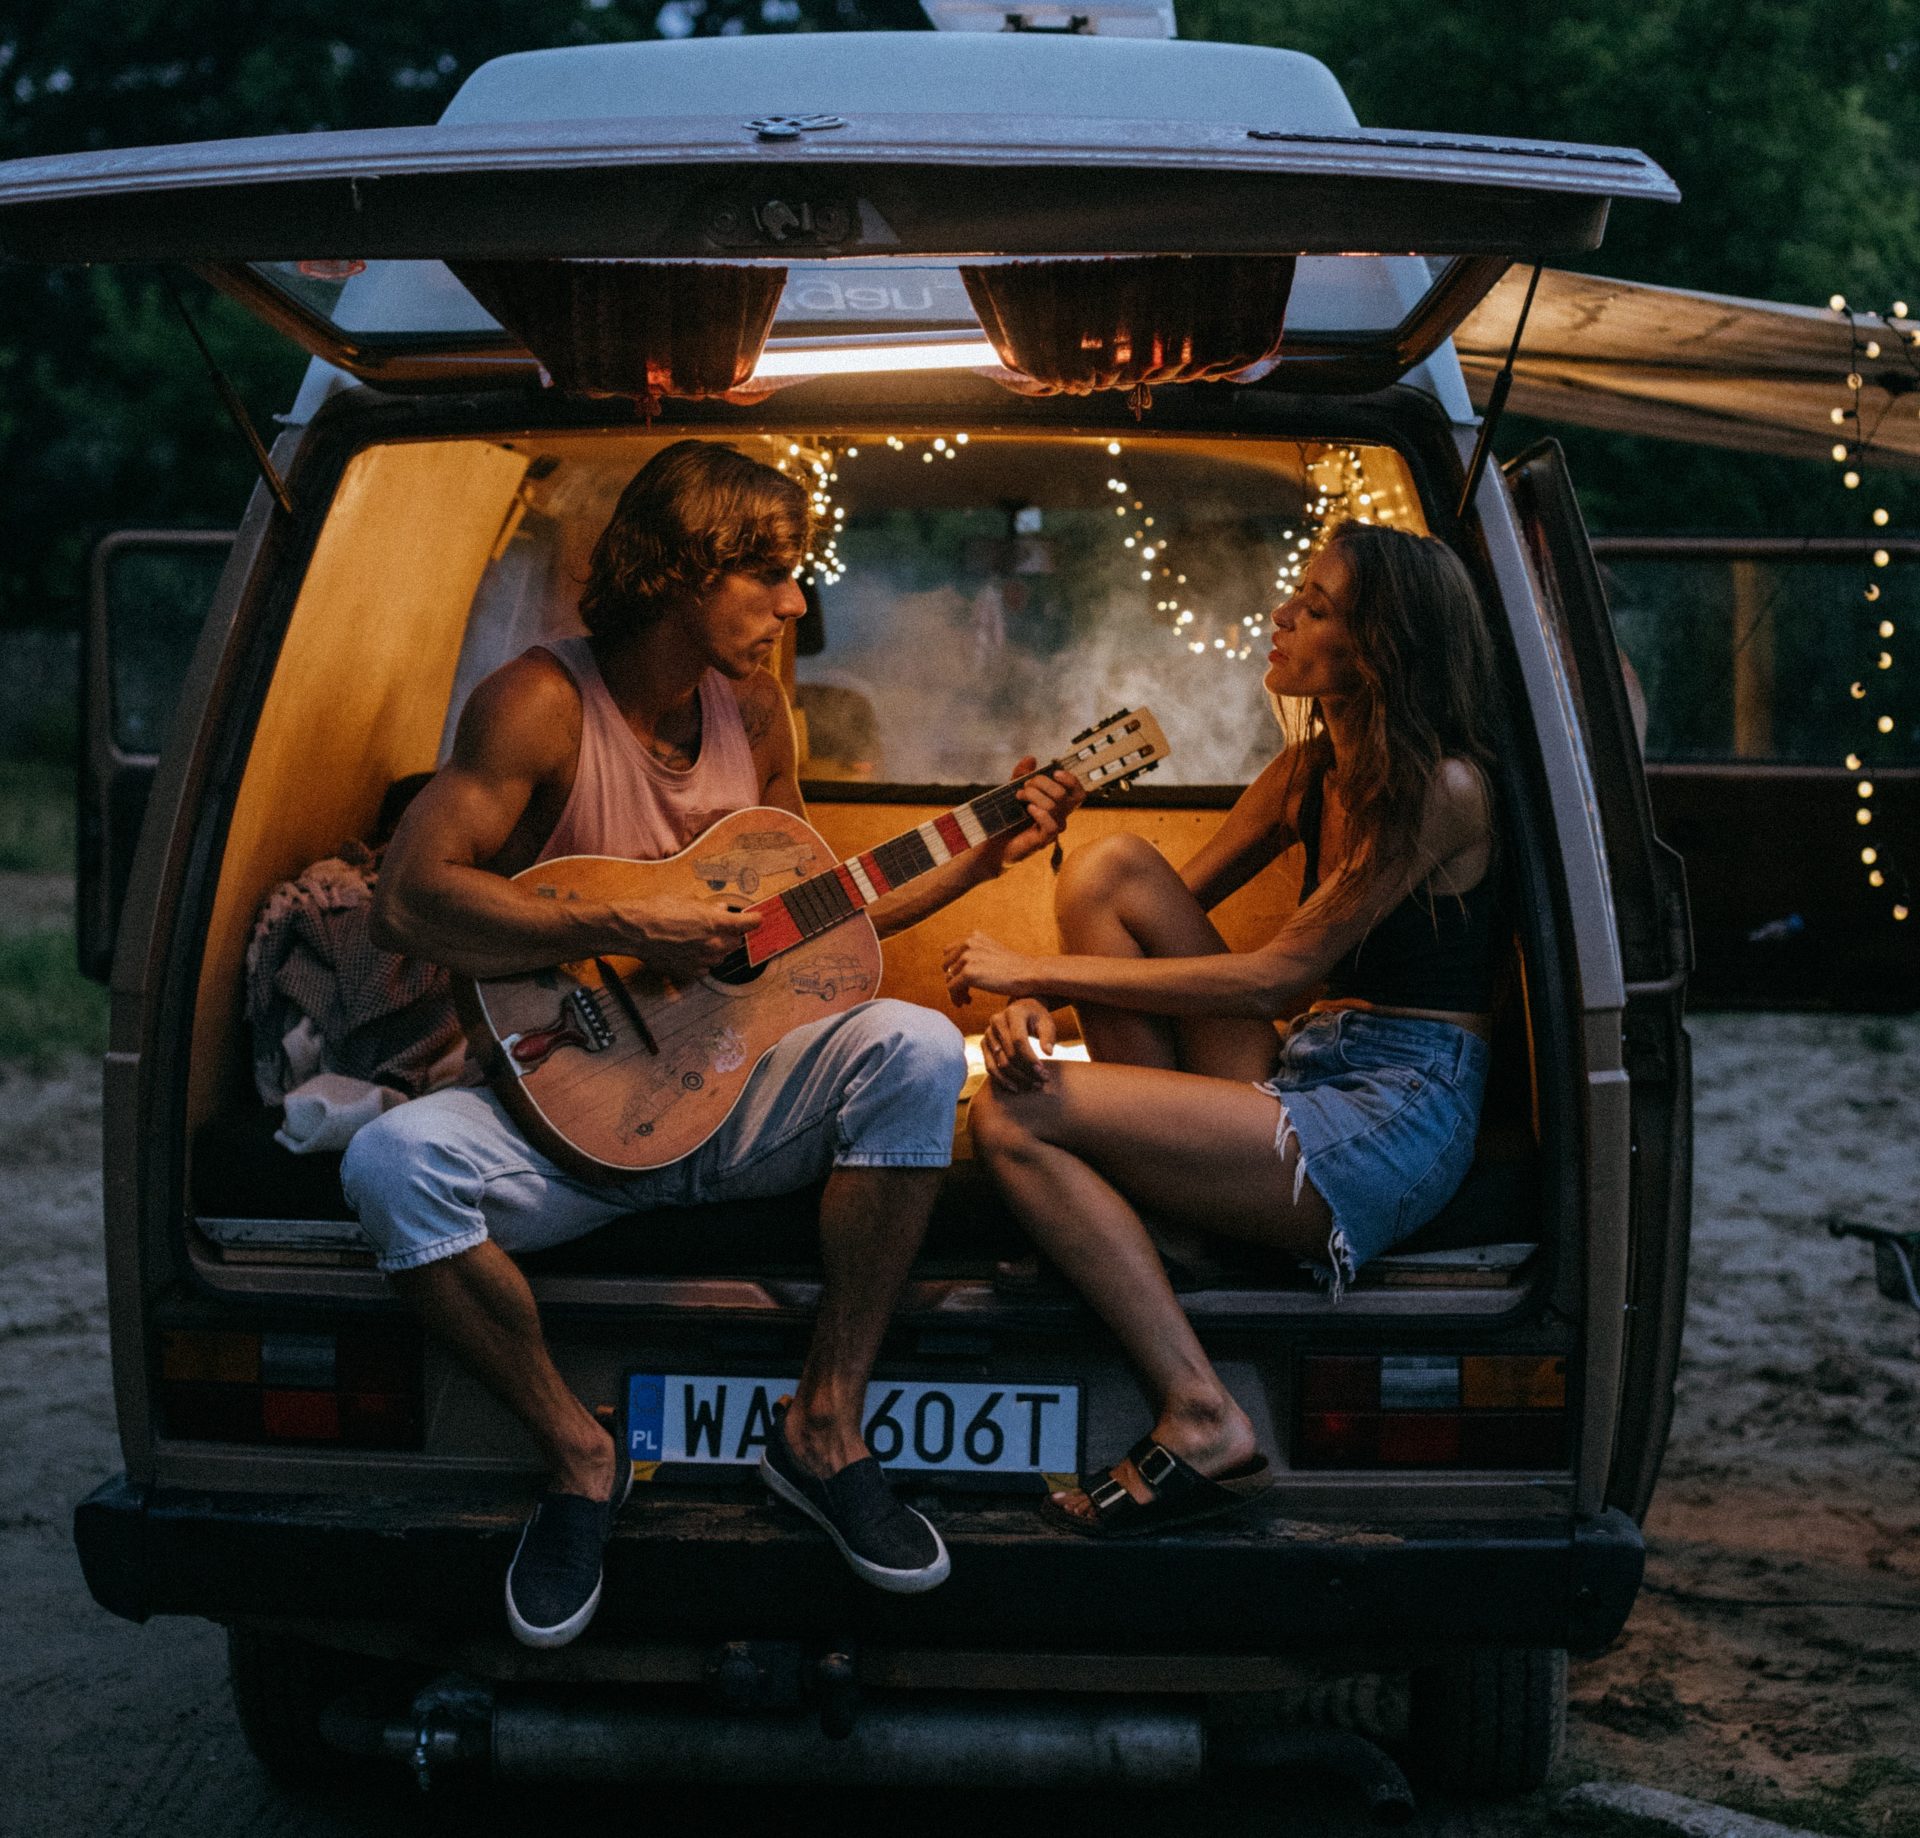 A couple in a there vehicle with RV lighting singing a song